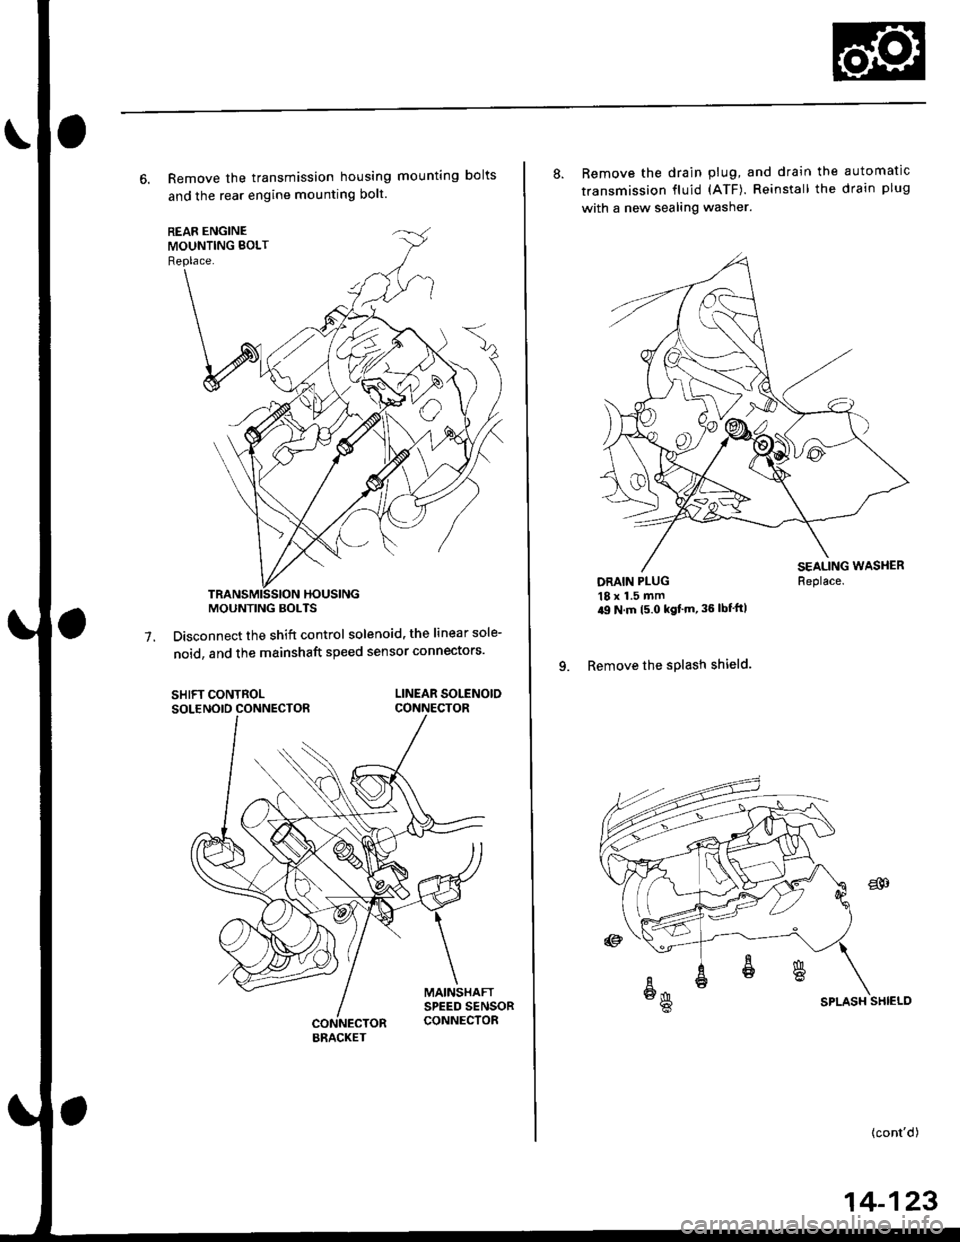 HONDA CIVIC 1997 6.G Workshop Manual 6. Remove the transmission housing mounting bolts
and the rear engine mounting bolt.
Disconnect the shift control solenoid, the linear sole-
noid, and the mainshaft speed sensor connectors7.
SHIFT CO